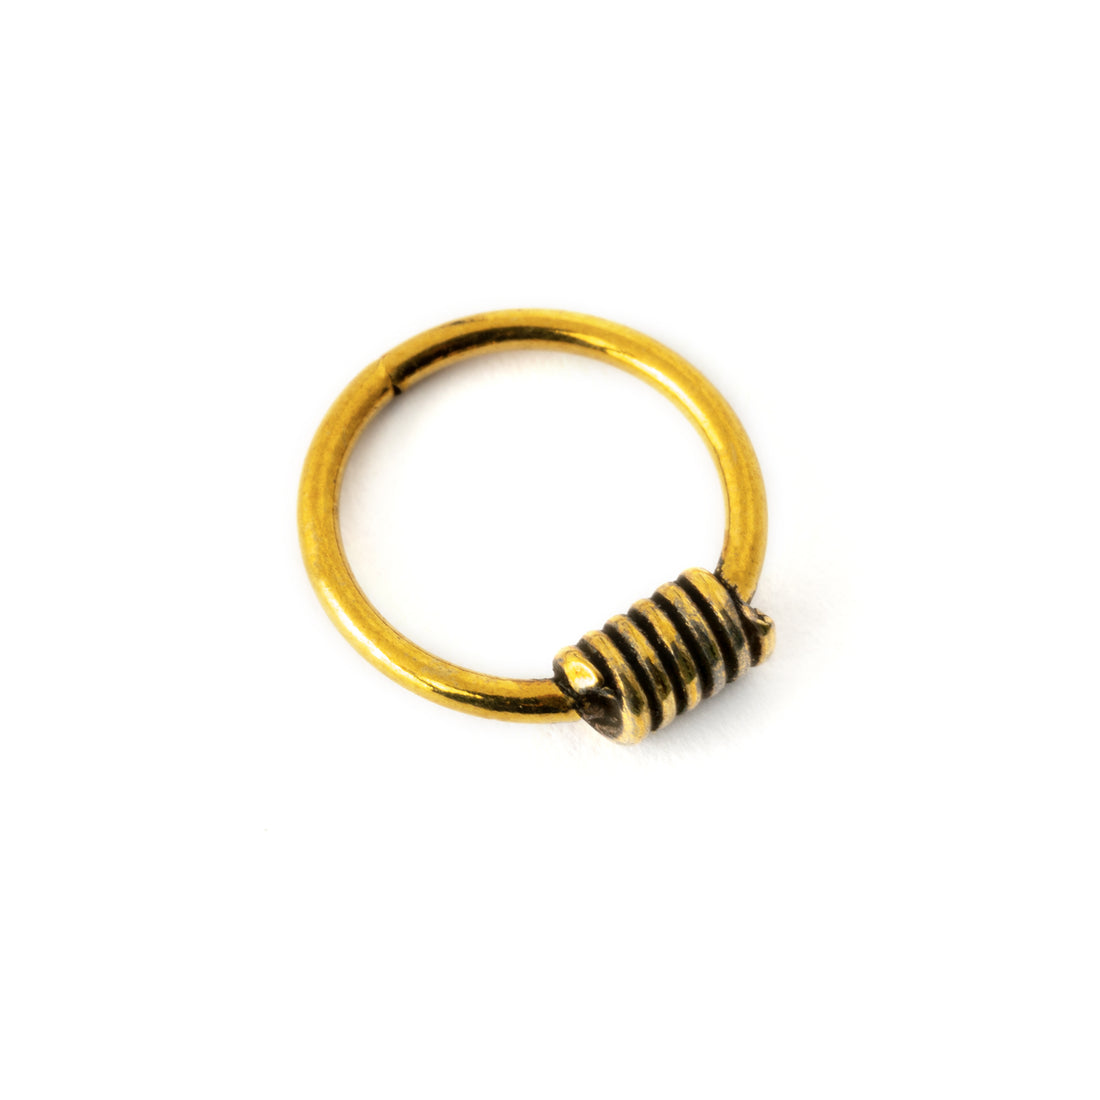 Brass coiled wire nose ring left side view